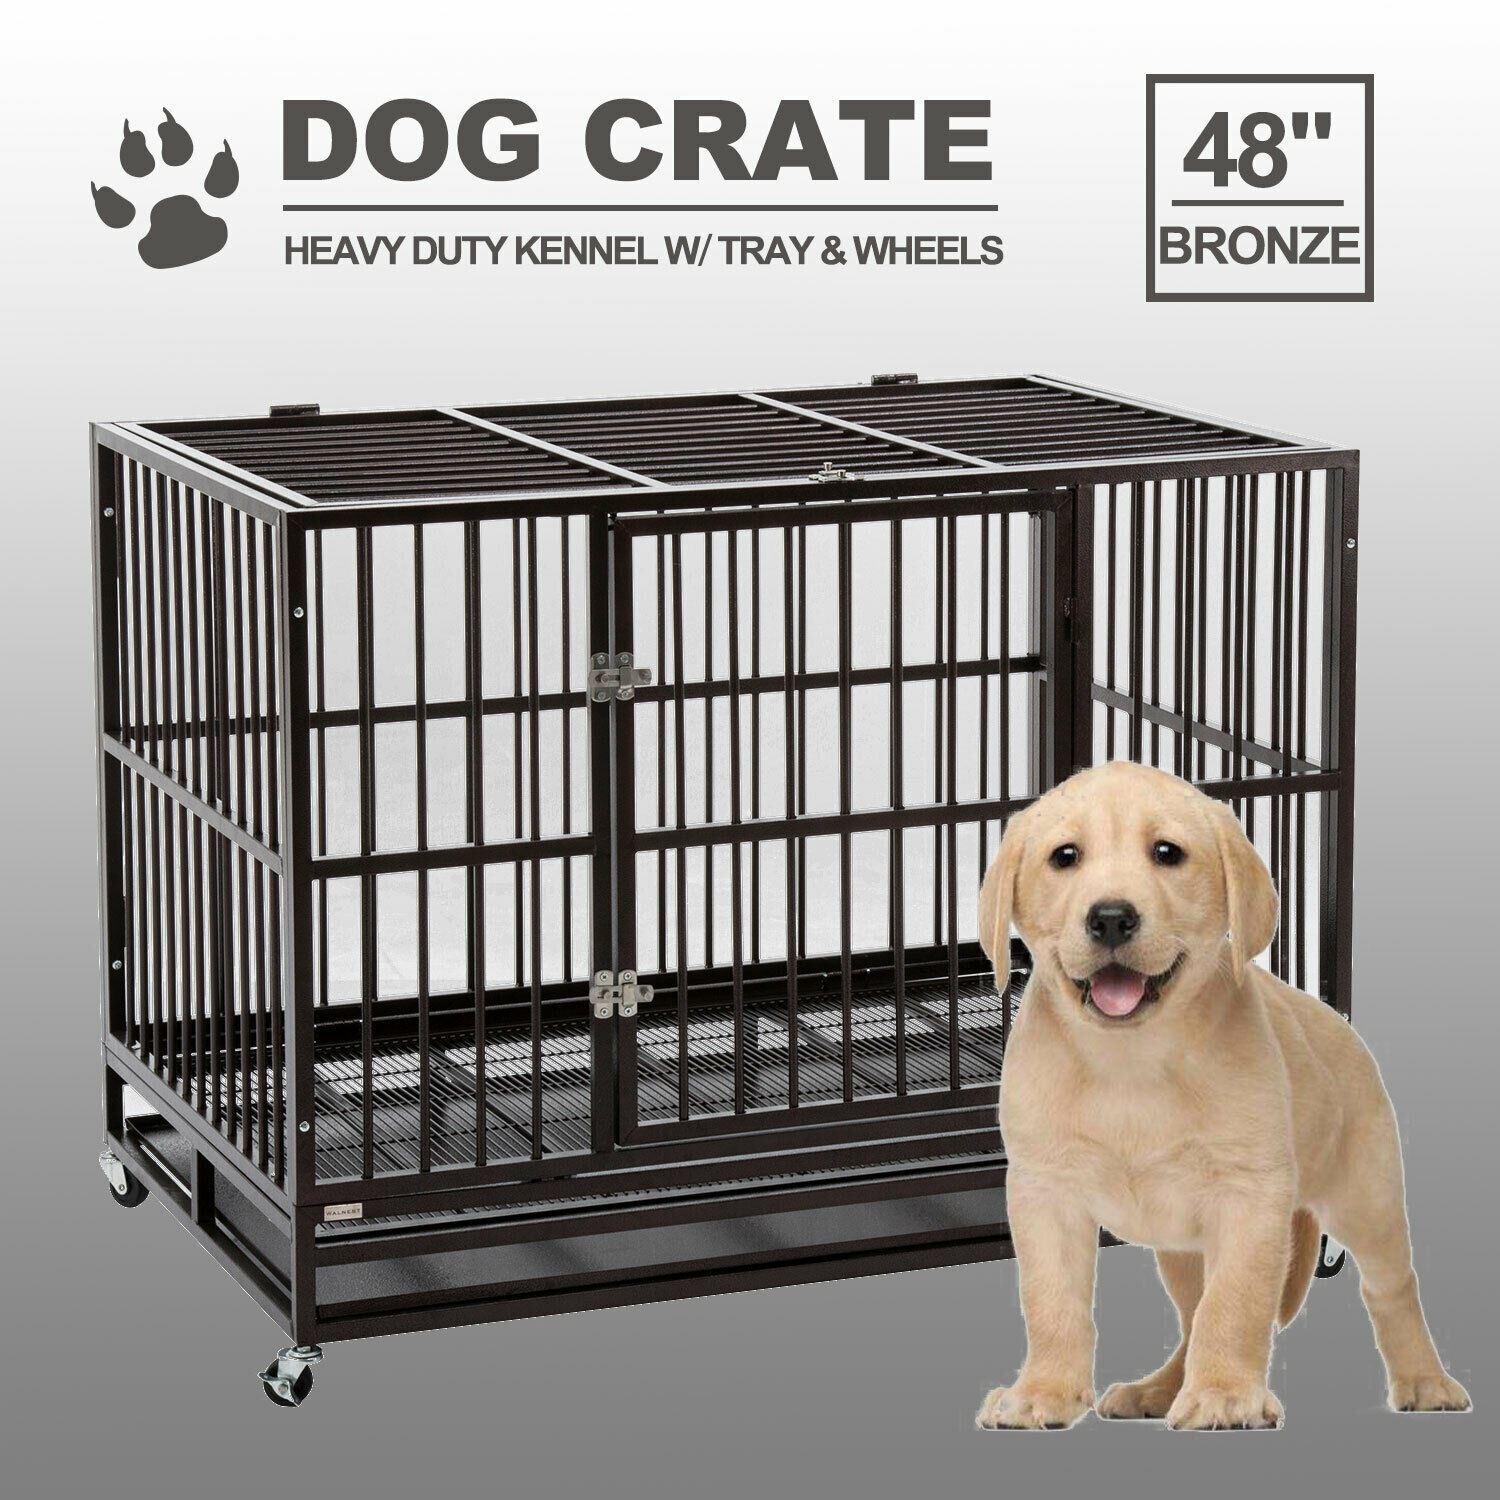 Xl 48" Dog Crate Large Kennel Cage Heavy Duty Metal Pet Playpen W/wheels & Tray